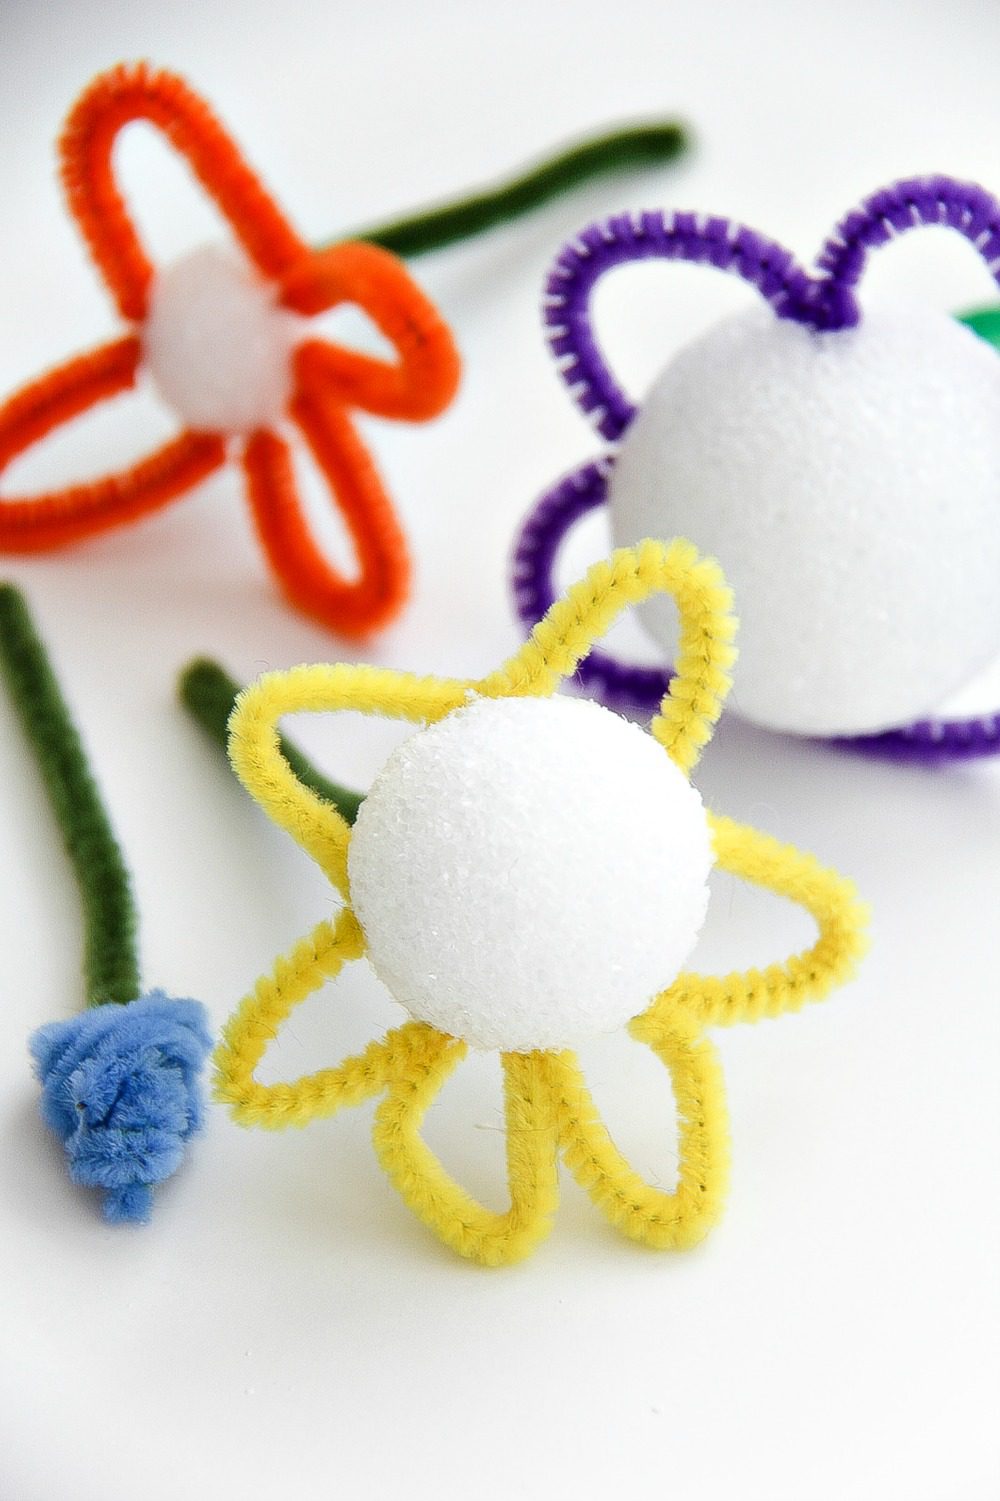 Kids Crafts: How to make chenille stem and foam ball flowers